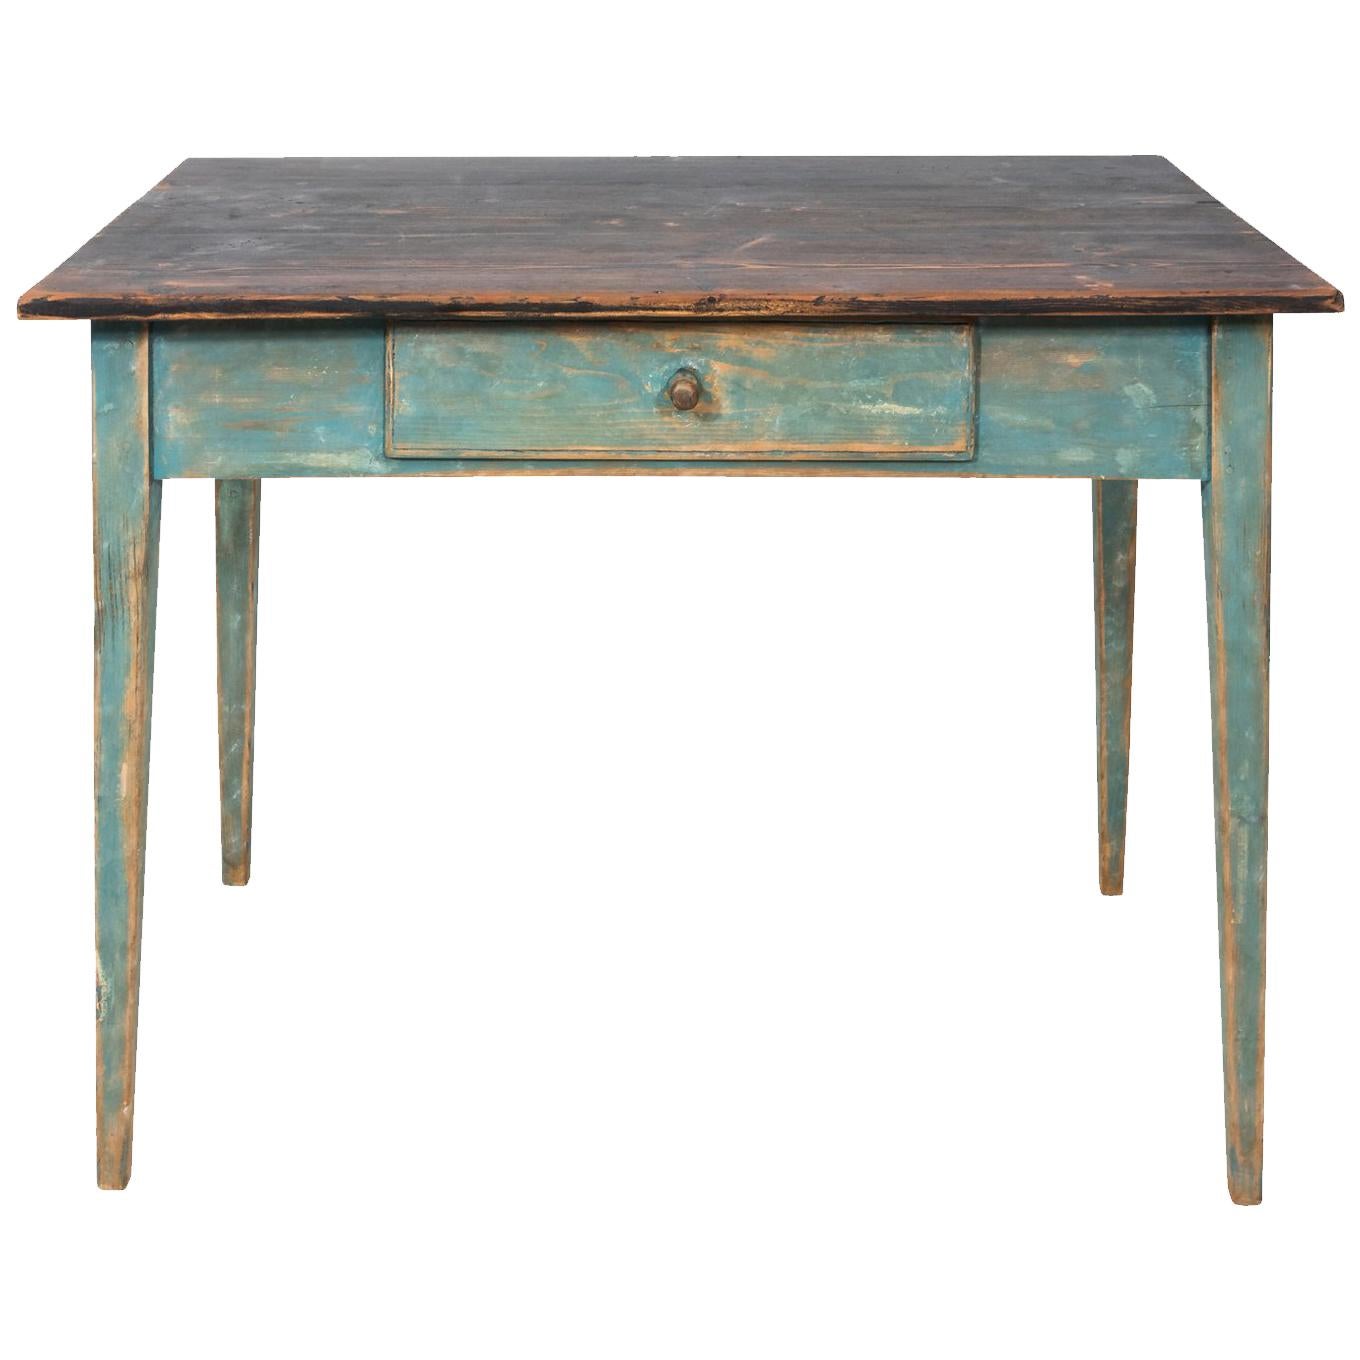 Mid-1800s Blue Painted Table with Black Painted Top im Angebot